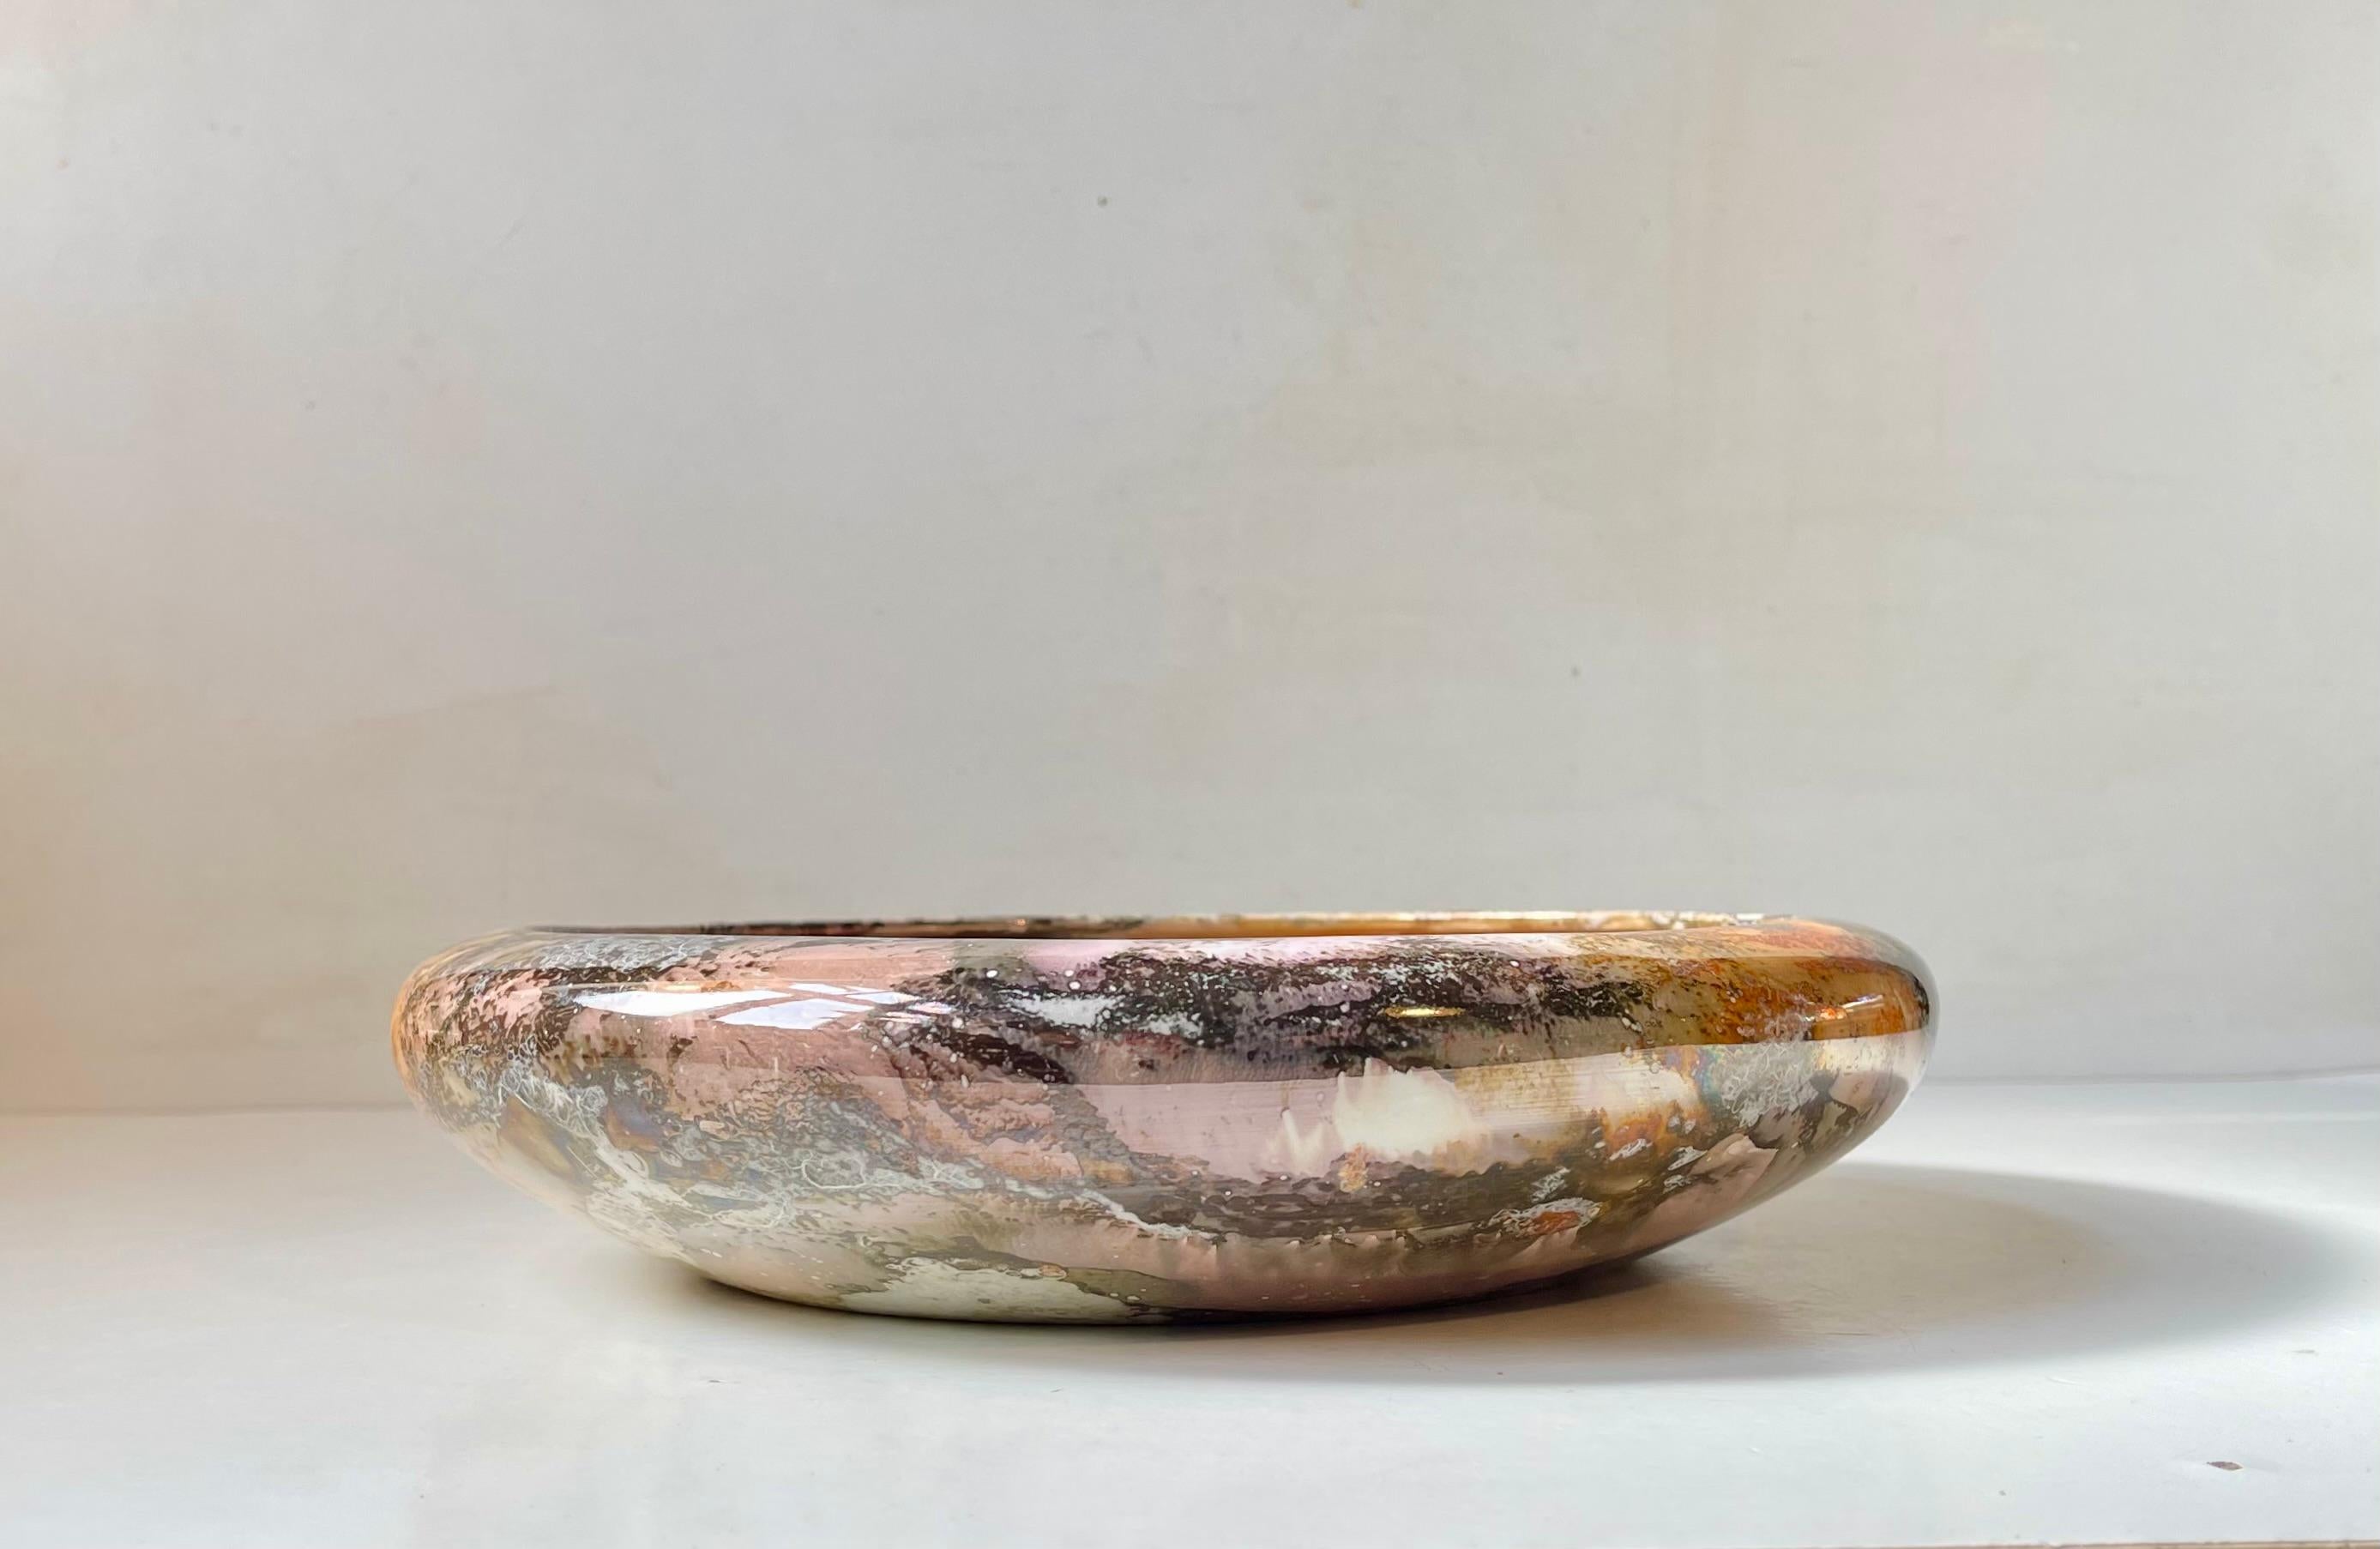 Exceptional centerpiece bowl decorated in marbled lustre glazes. Its made from faience/ceramic and the color palet burst out in a vibrancy of pink, orange, brown, black, grey and white. Designed and made by Arabia in Finland during the late 1920s.